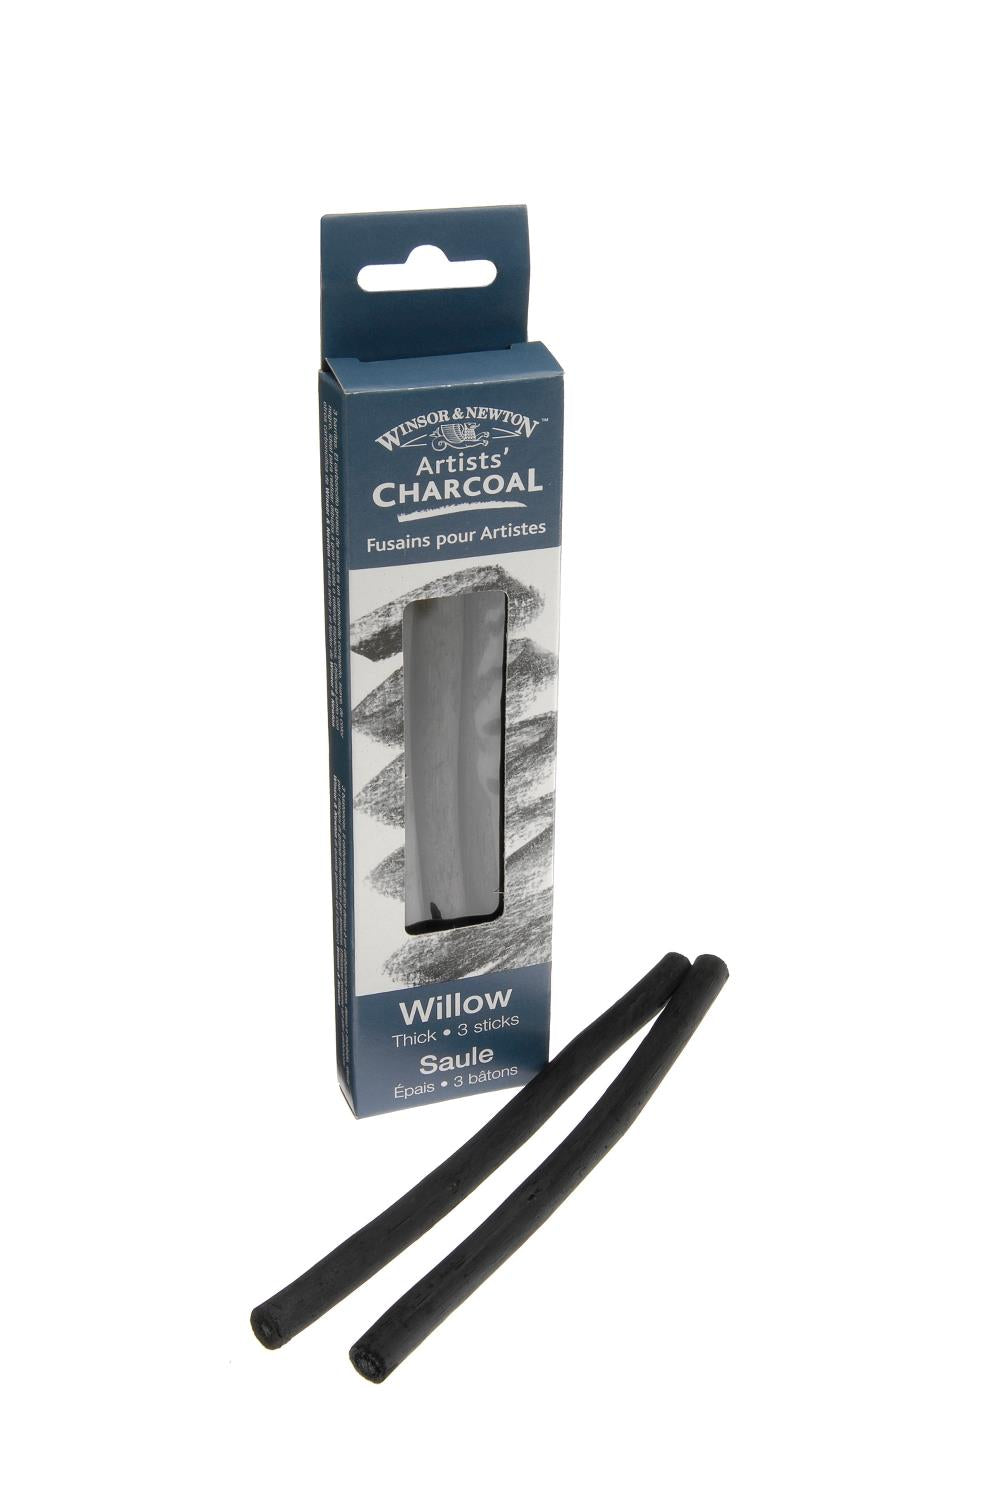 Winsor & Newton Charcoal Willow - 12 Thick charcoal sticks